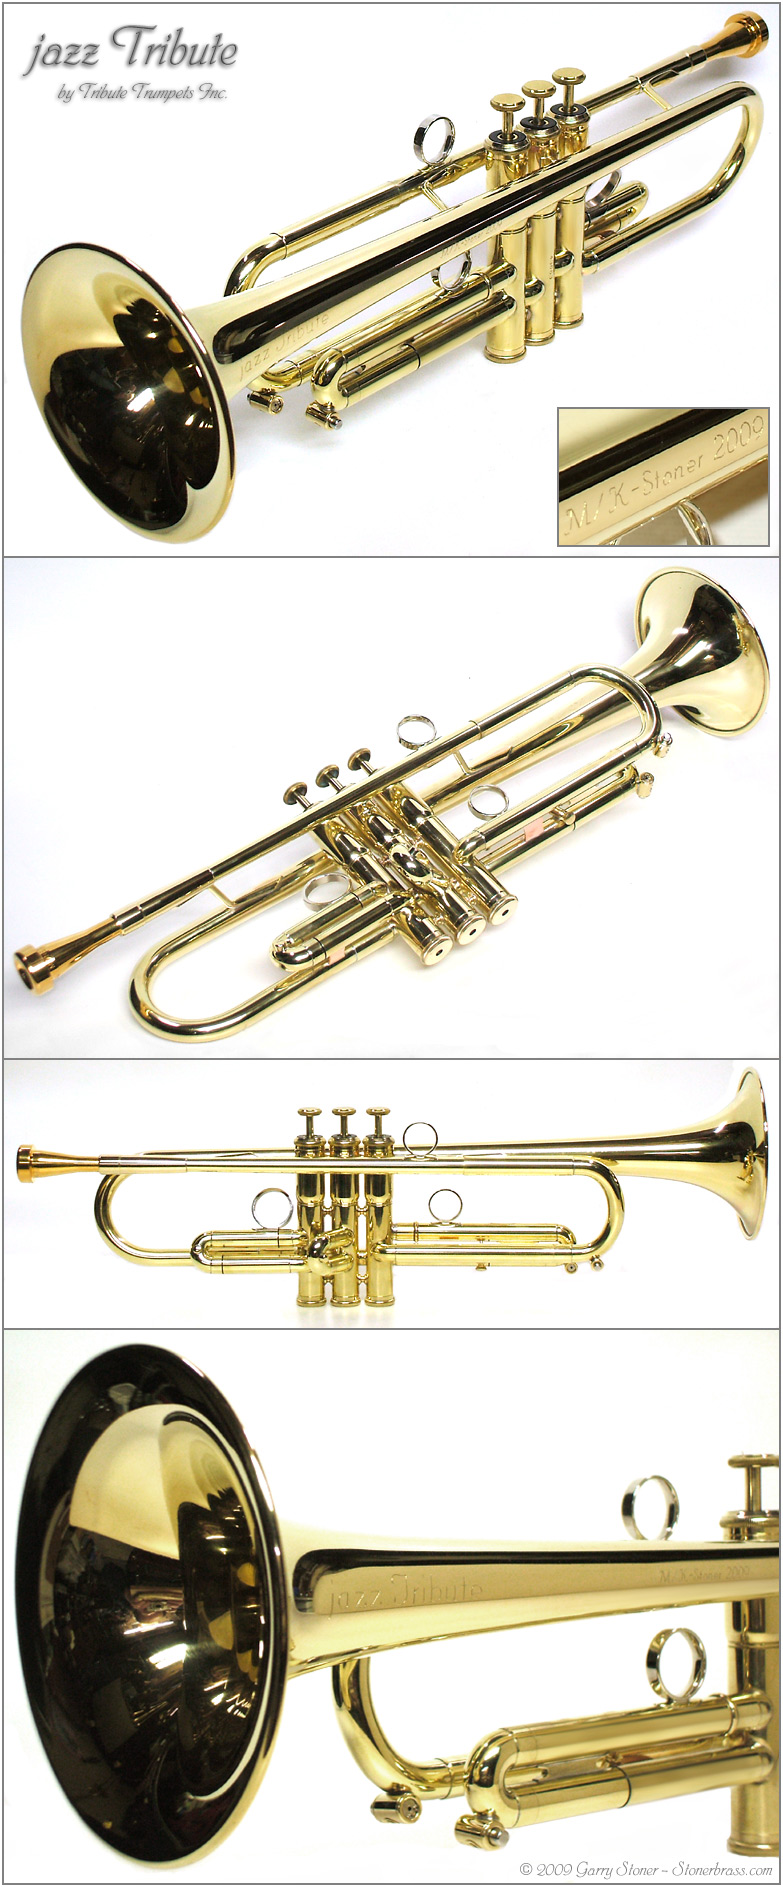 jazz Tribute Prototype.jpg - Tribute Trumpets, a collaboration by M/K Drawing and Stoner Brass.